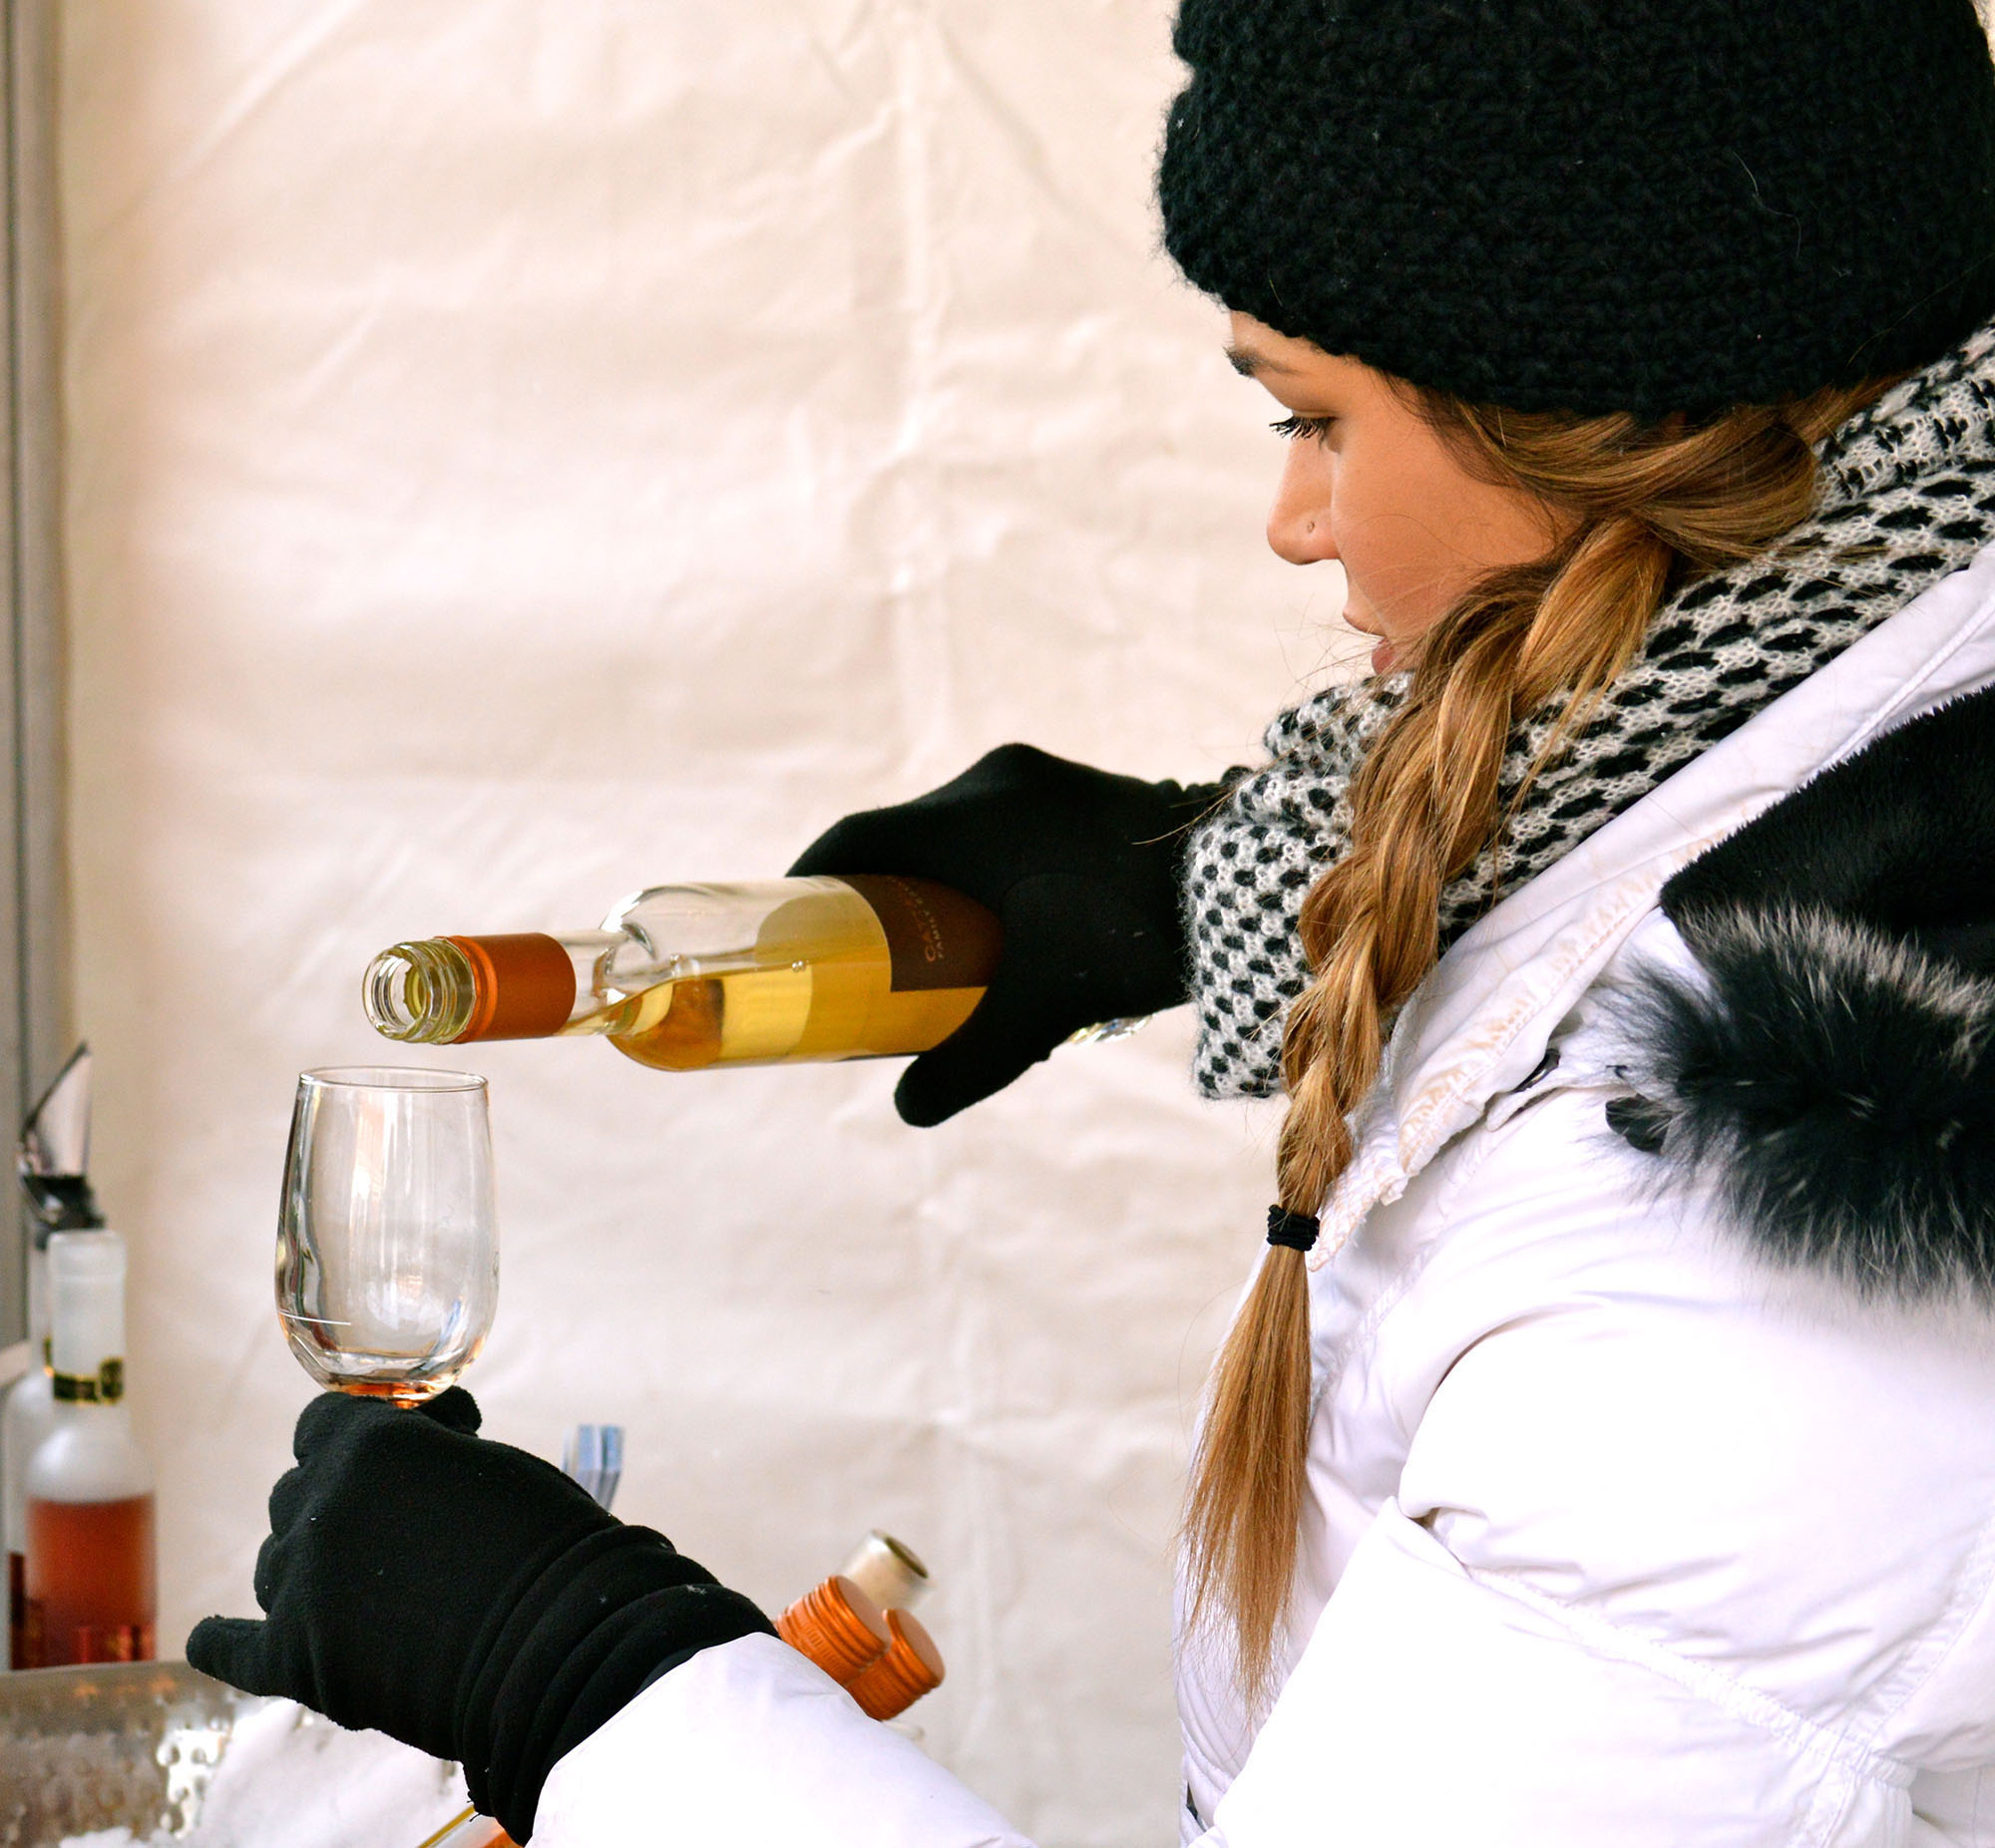 WINE COUNTRY ONTARIO - Icewine Festival transforms Wine Country